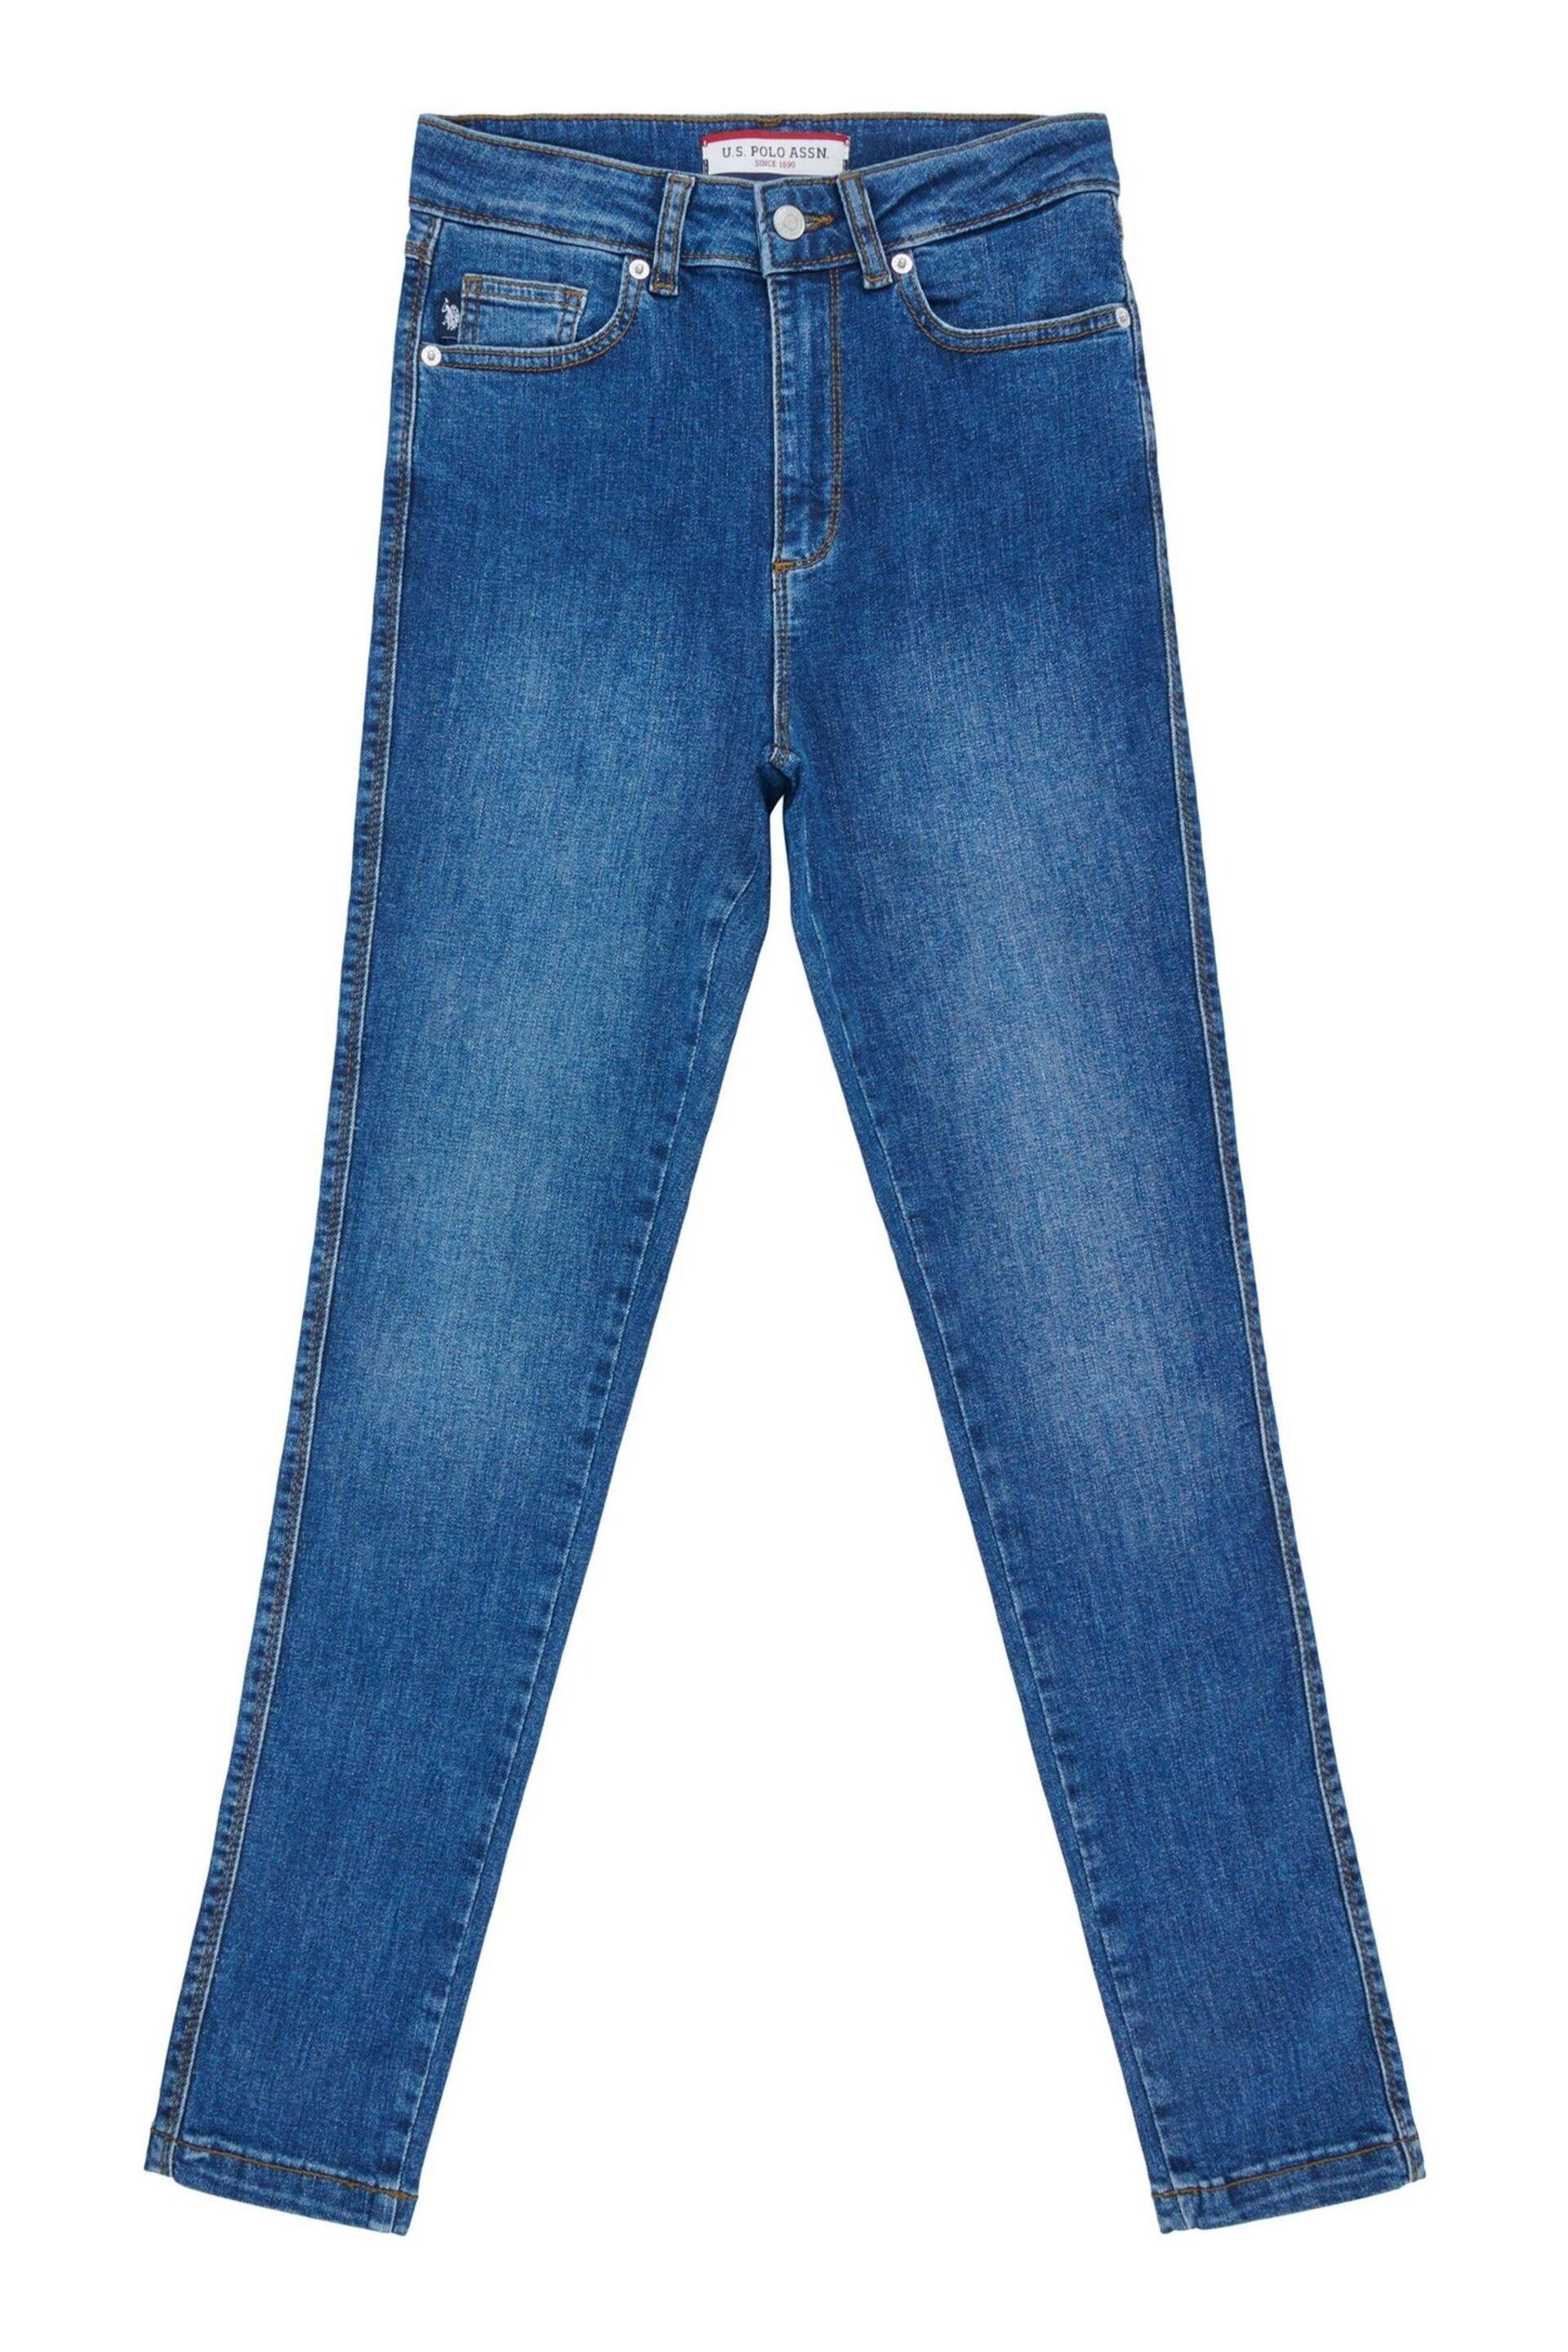 U.S. Polo Assn. Womens Sculpture Skinny Fit Jeans - Image 4 of 4